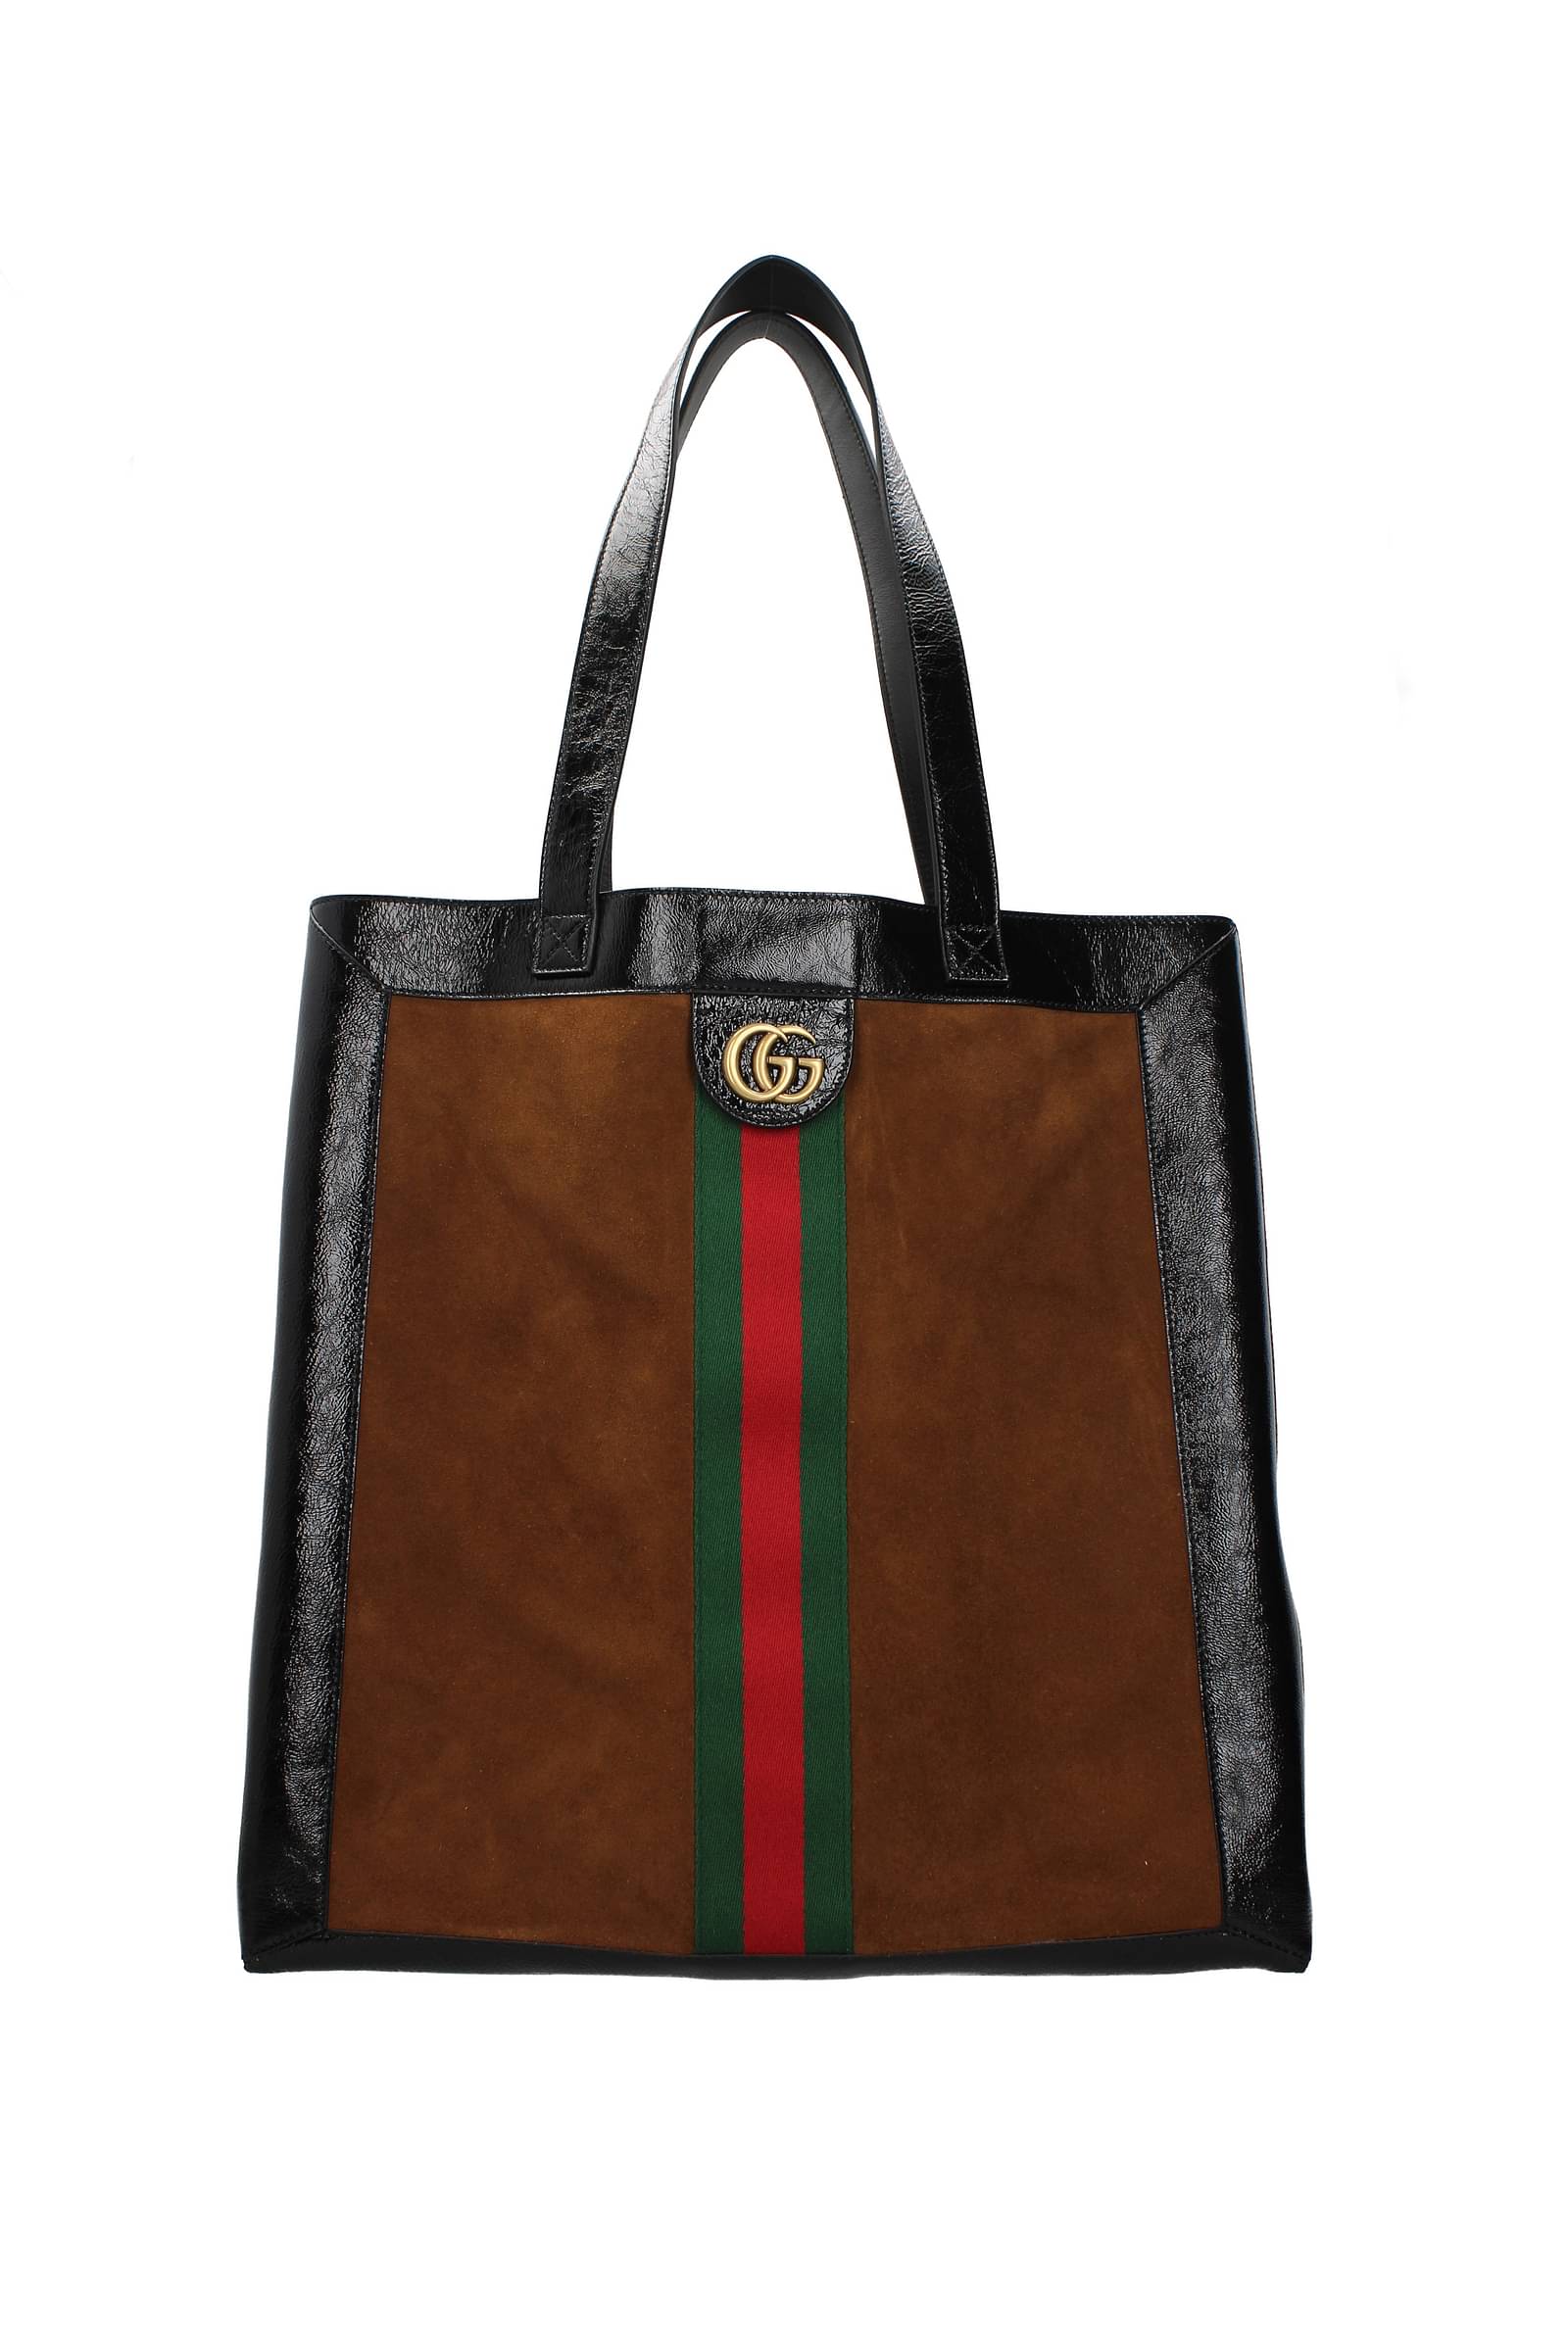 gucci bags usa outlet